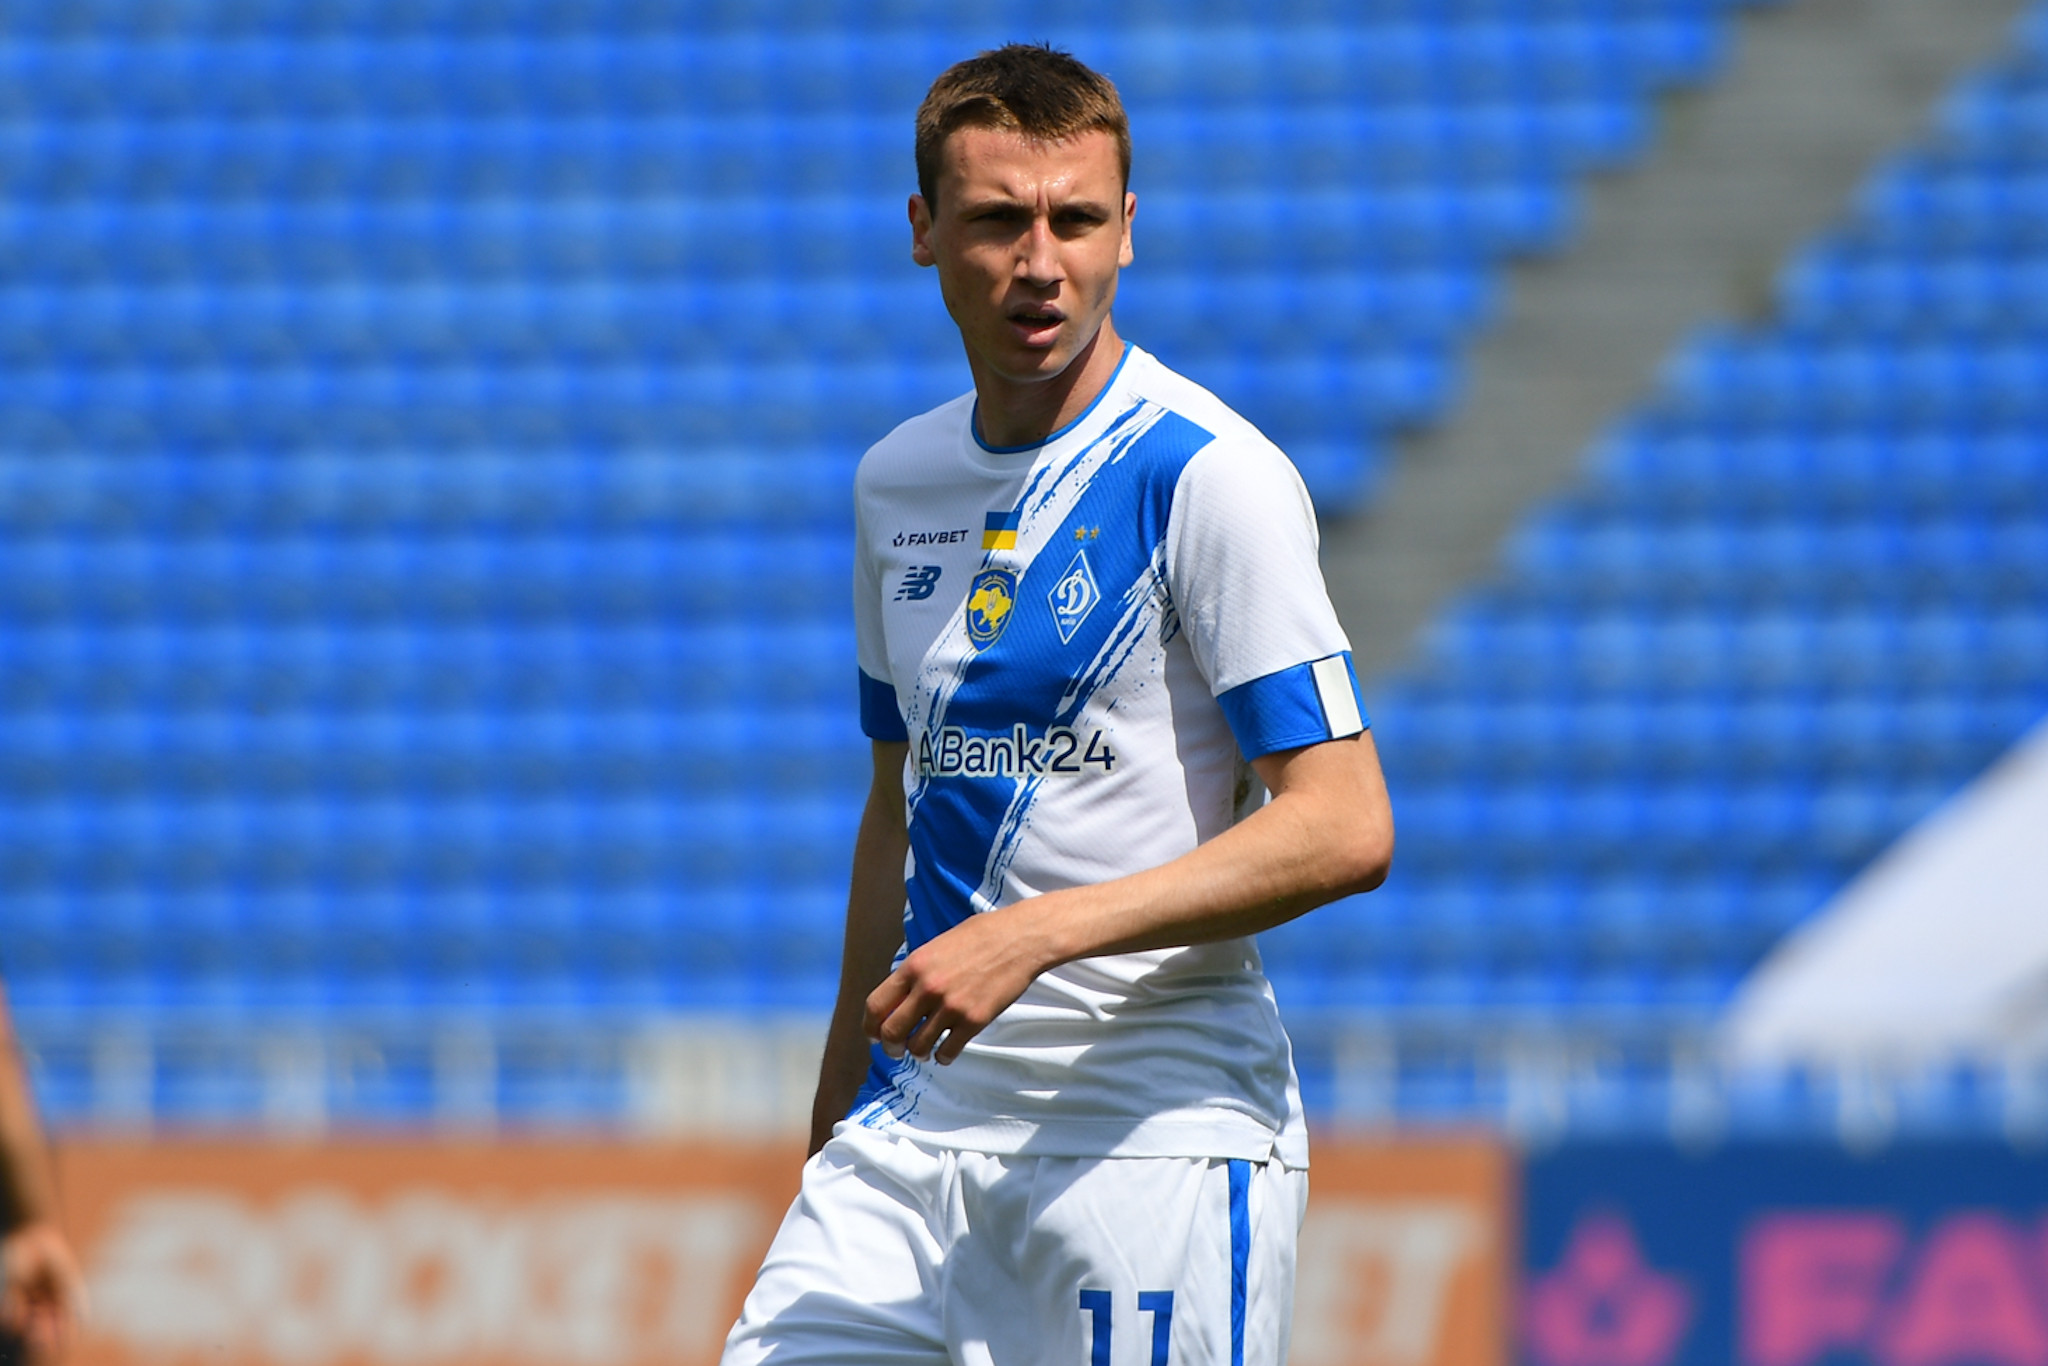 Vladyslav Vanat nominated for UPL player of the month